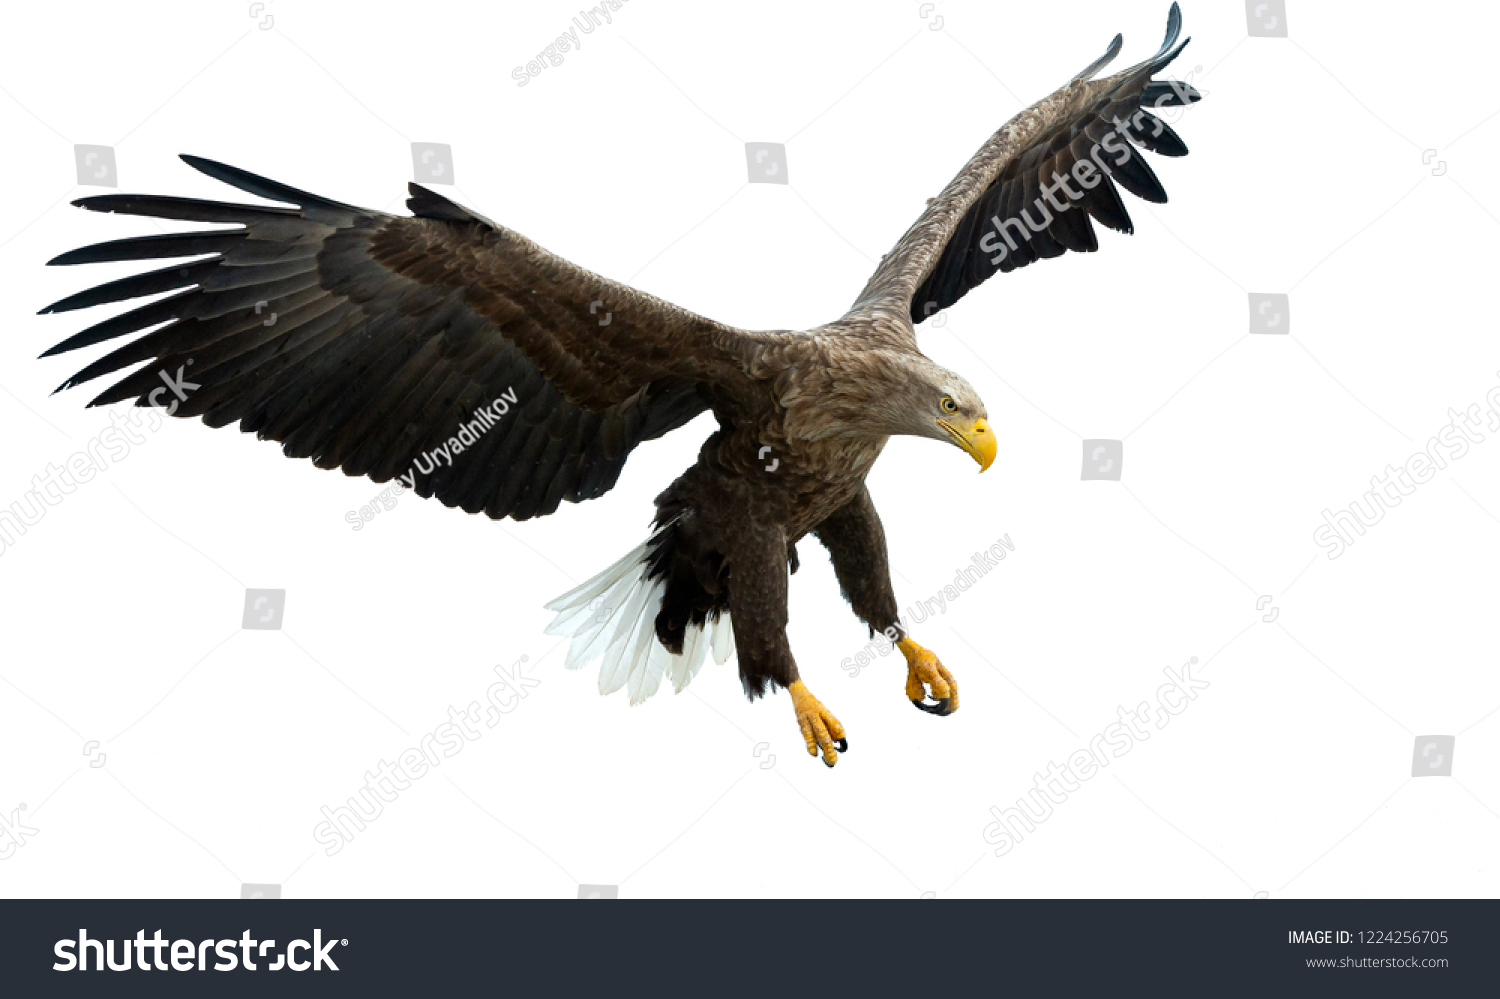 Adult White tailed eagle in flight. Isolated on White background. Scientific name: Haliaeetus albicilla, also known as the ern, erne, gray eagle, Eurasian sea eagle and white-tailed sea-eagle. #1224256705